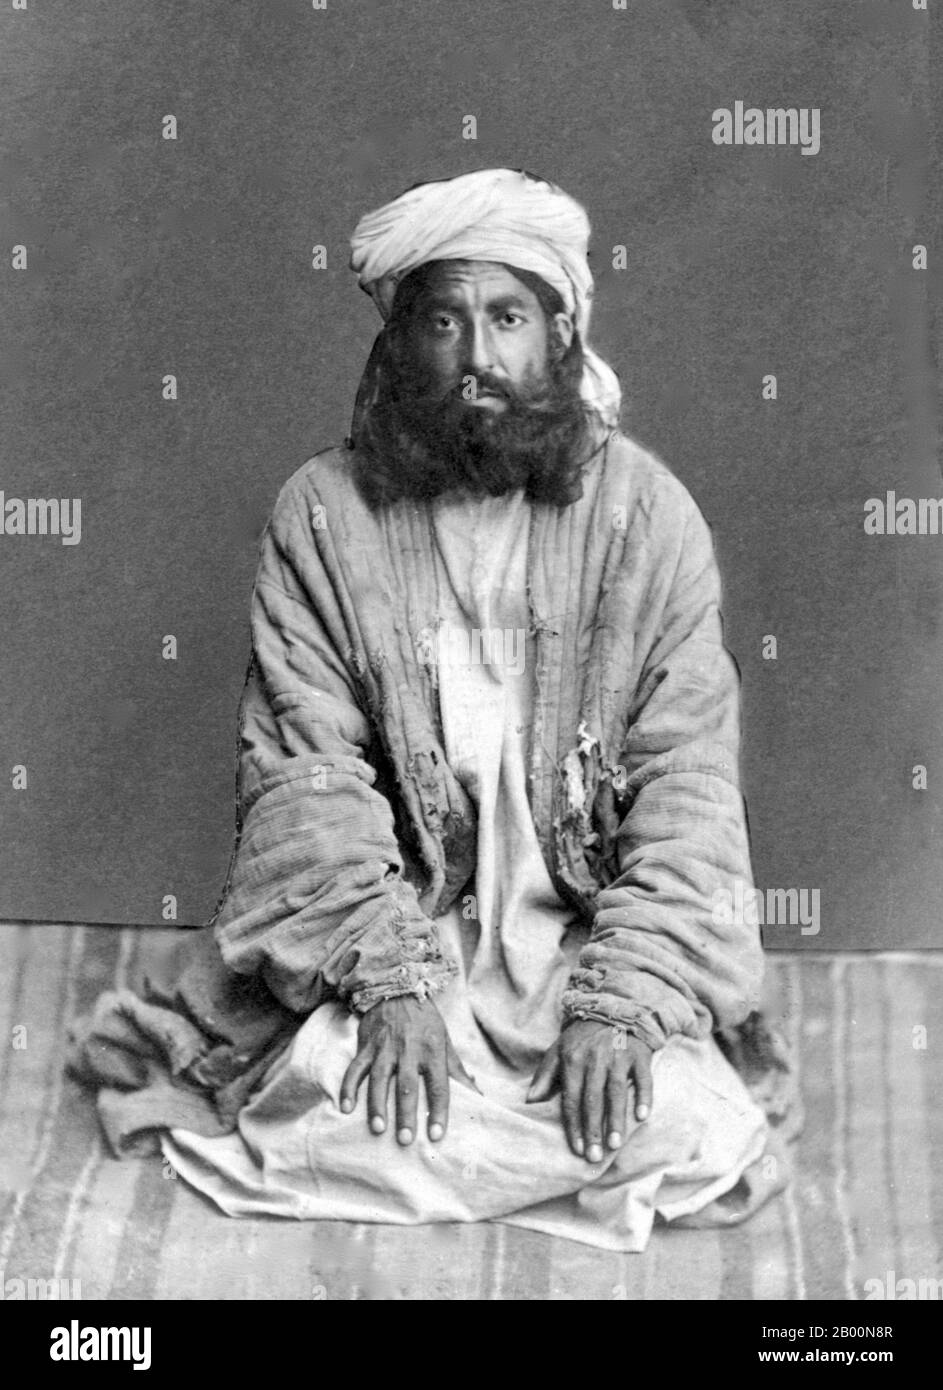 Afghanistan: Pashtun man, late 19th century.  Pashtuns, also called Pathans, are an Eastern Iranian ethno-linguistic group with populations primarily in Afghanistan and northwestern Pakistan, which includes Khyber-Pakhtunkhwa, Federally Administered Tribal Areas (FATA) and Balochistan. The Pashtuns are typically characterized by their usage of the Pashto language and practice of Pashtunwali, a traditional set of ethics guiding individual and communal conduct. Stock Photo